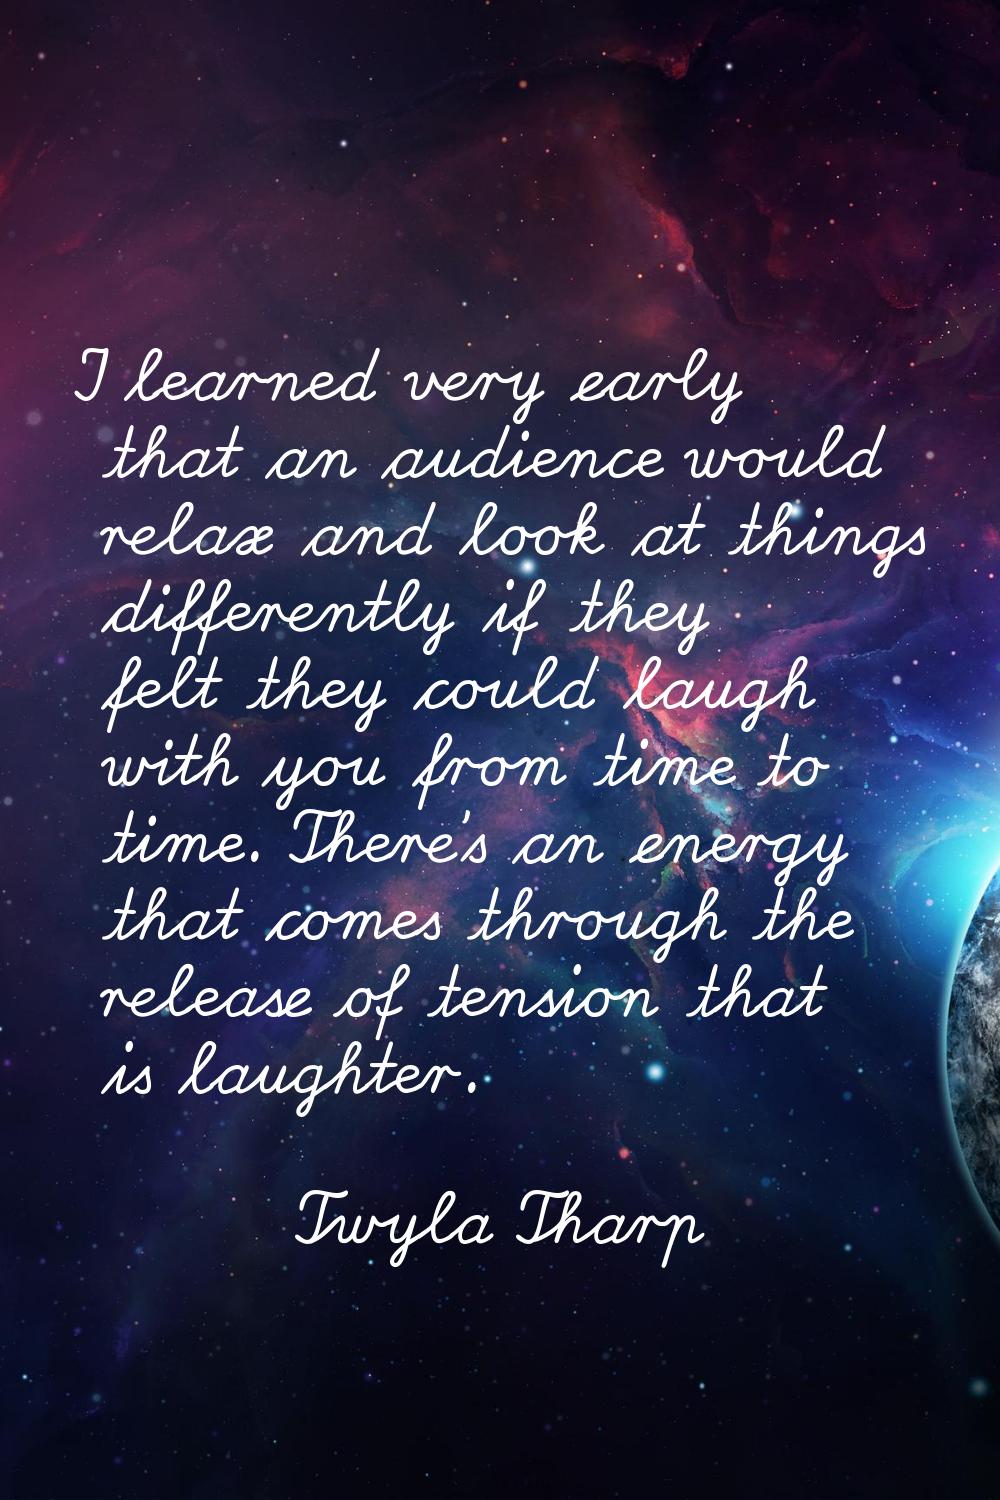 I learned very early that an audience would relax and look at things differently if they felt they 